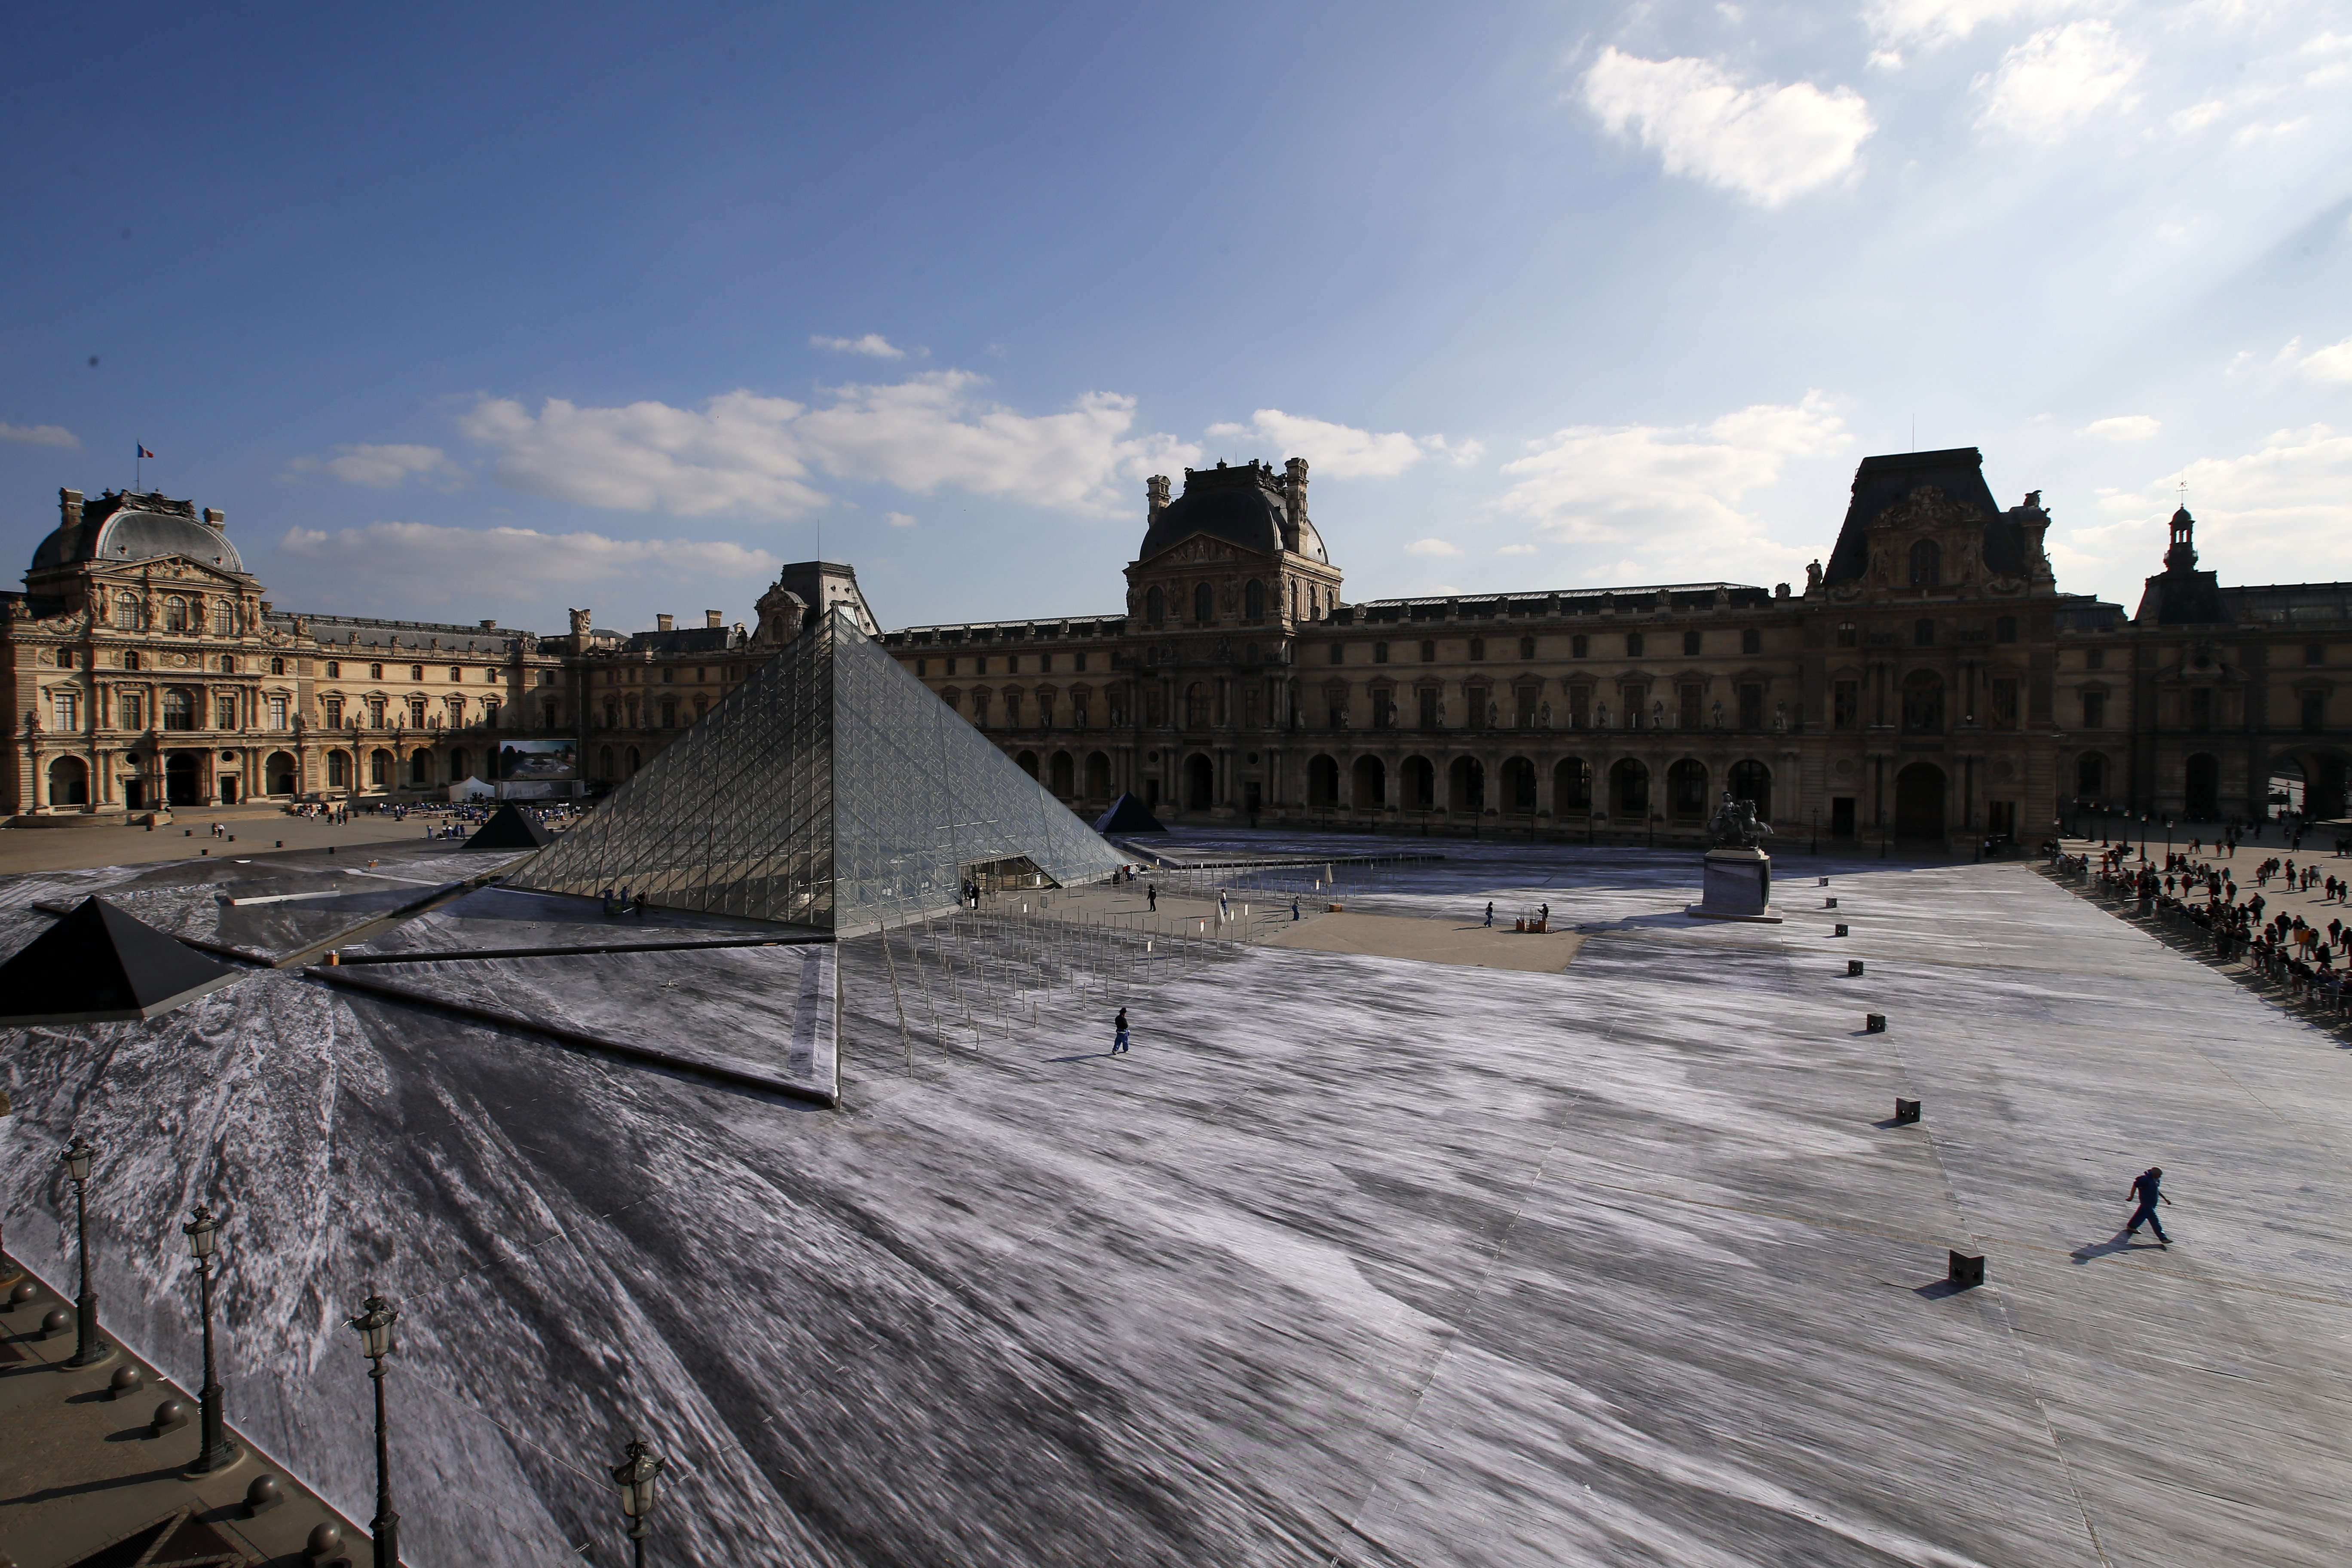 The creation fo French street artist JR is pictured in the courtyard of the Louvre Museum near the glass pyramid designed by Leoh Ming Pei, in Paris, Friday, March 29, 2019 as the Louvre Museum celebrates the 30th anniversary of its glass pyramid. JR project is a giant collage of the pyramid to bring it out of the ground by revealing the foundations of the Napoleon courtyard where it is erected. (AP Photo/Francois Mori)